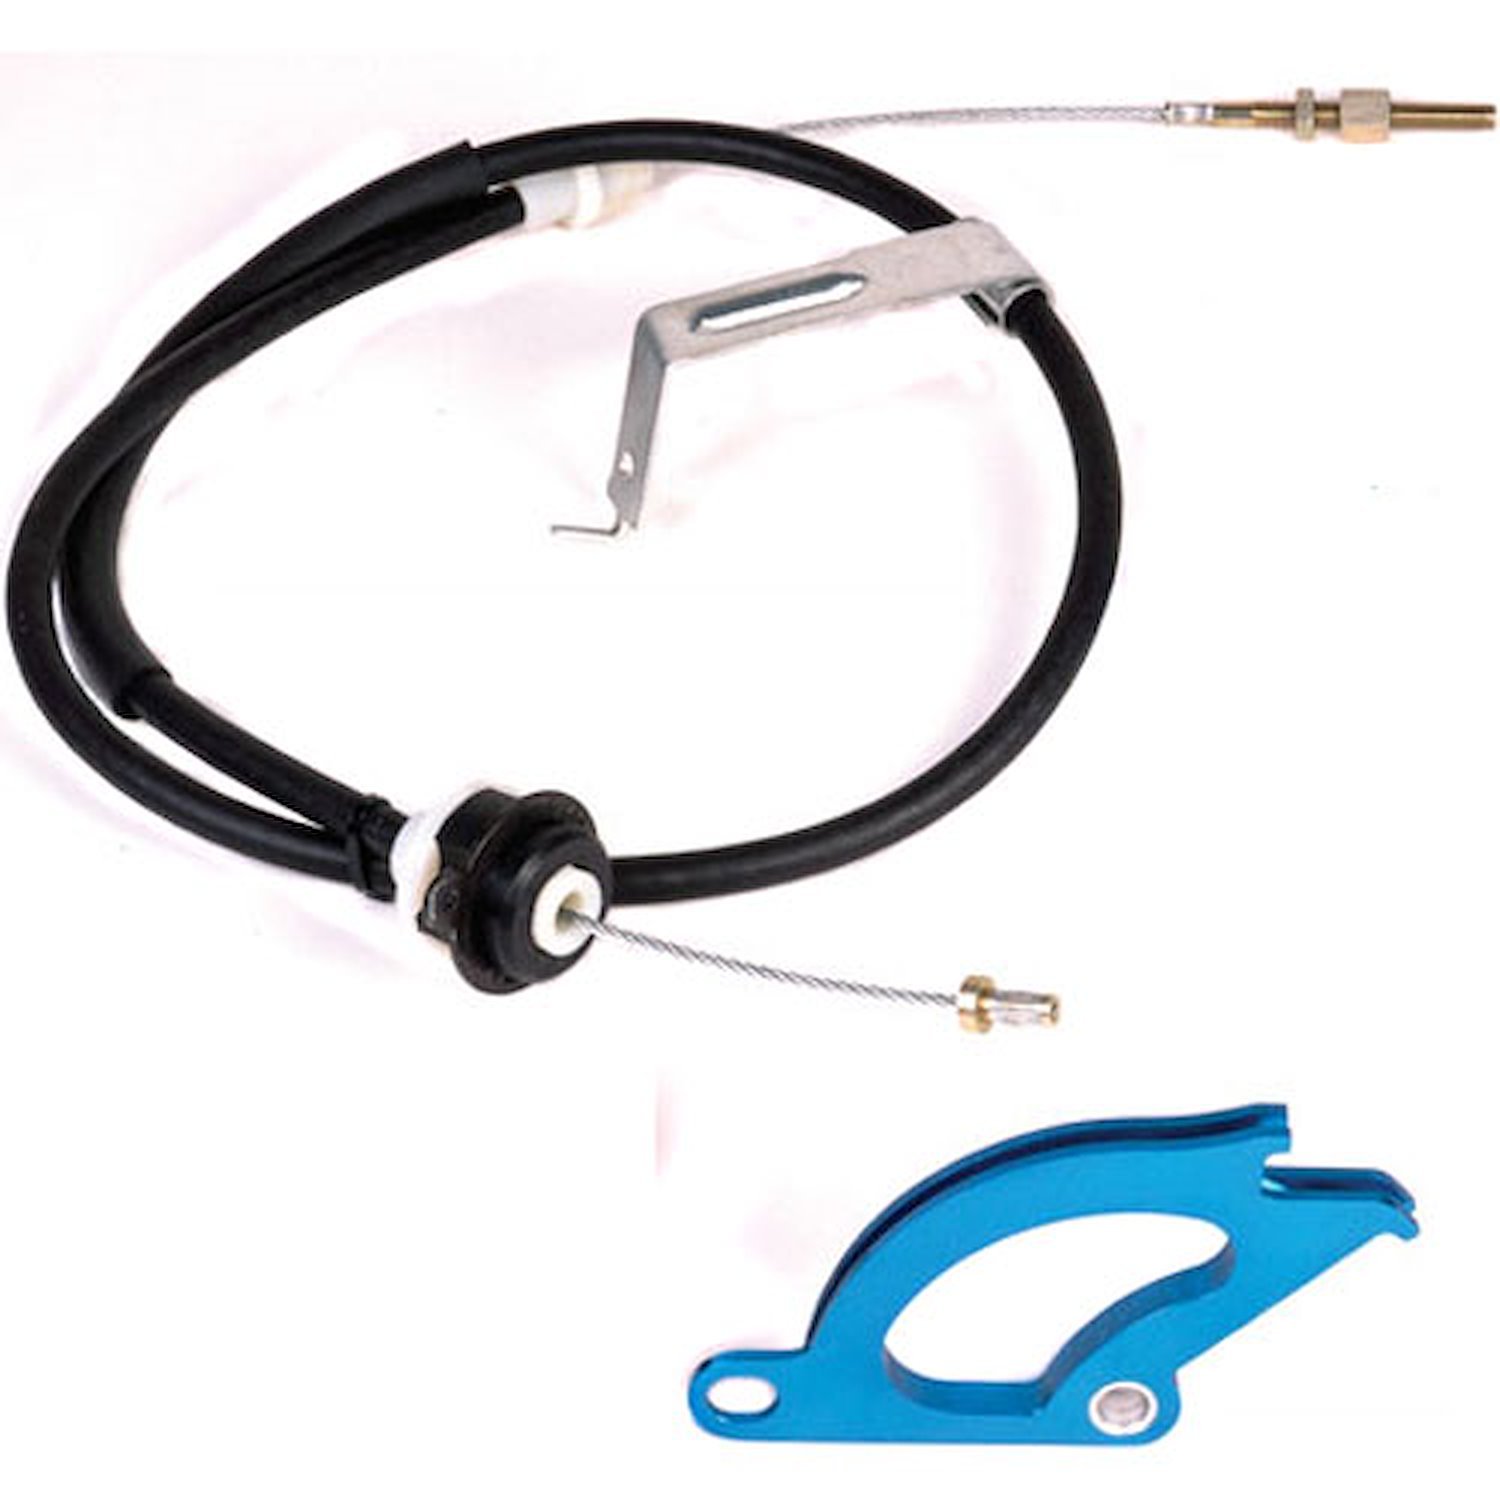 Adjustable Quadrant & Clutch Cable Kit Mustang 1979-2004 Includes: